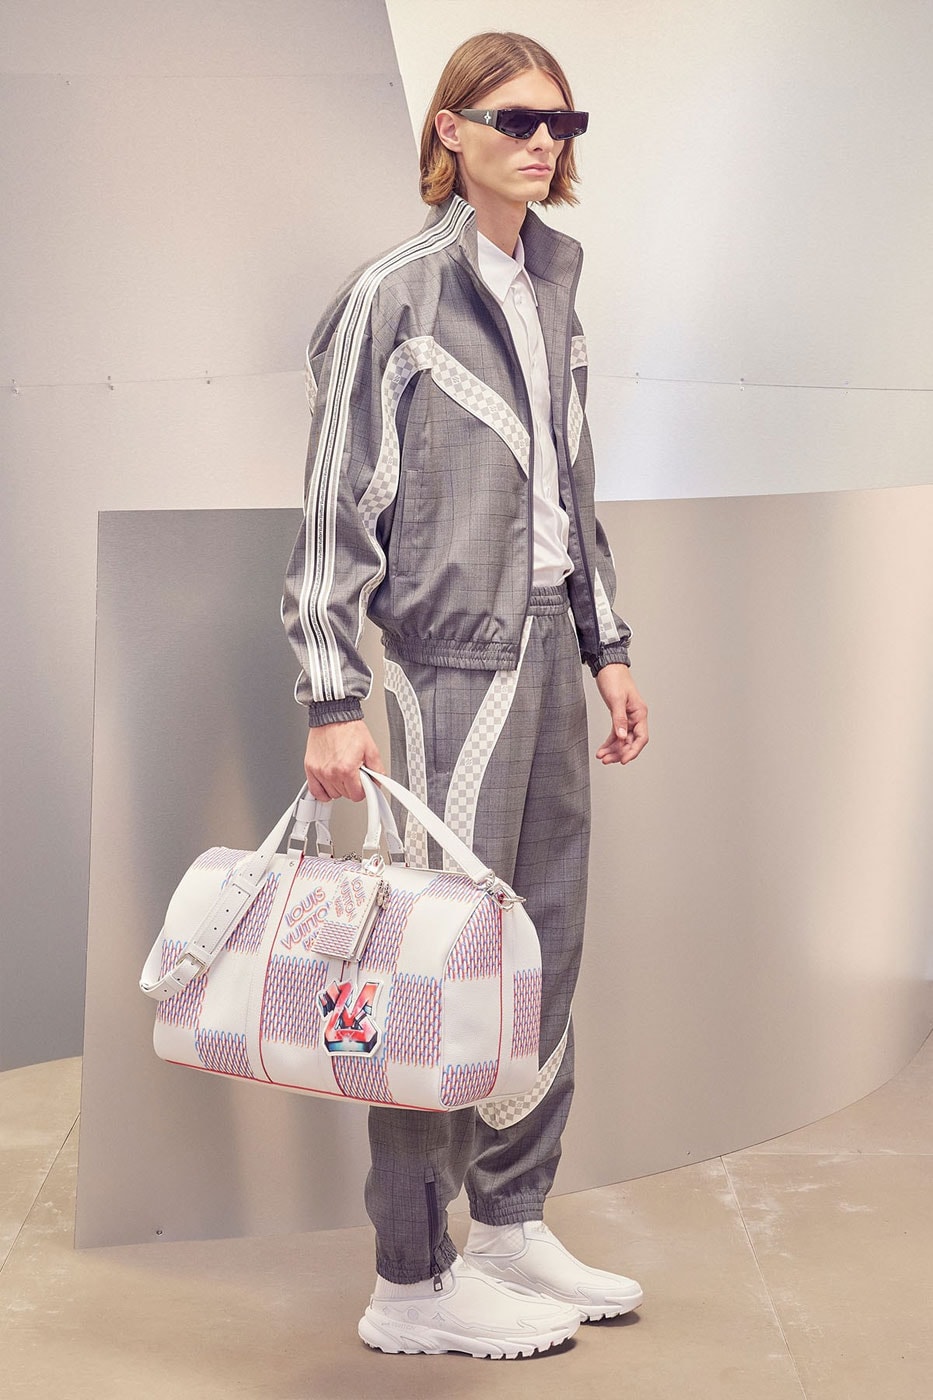 First Drop of Virgil Abloh's Final Louis Vuitton's Pre-FW22 Collection Has Arrived ghusto leon lvmh high fashion luxury